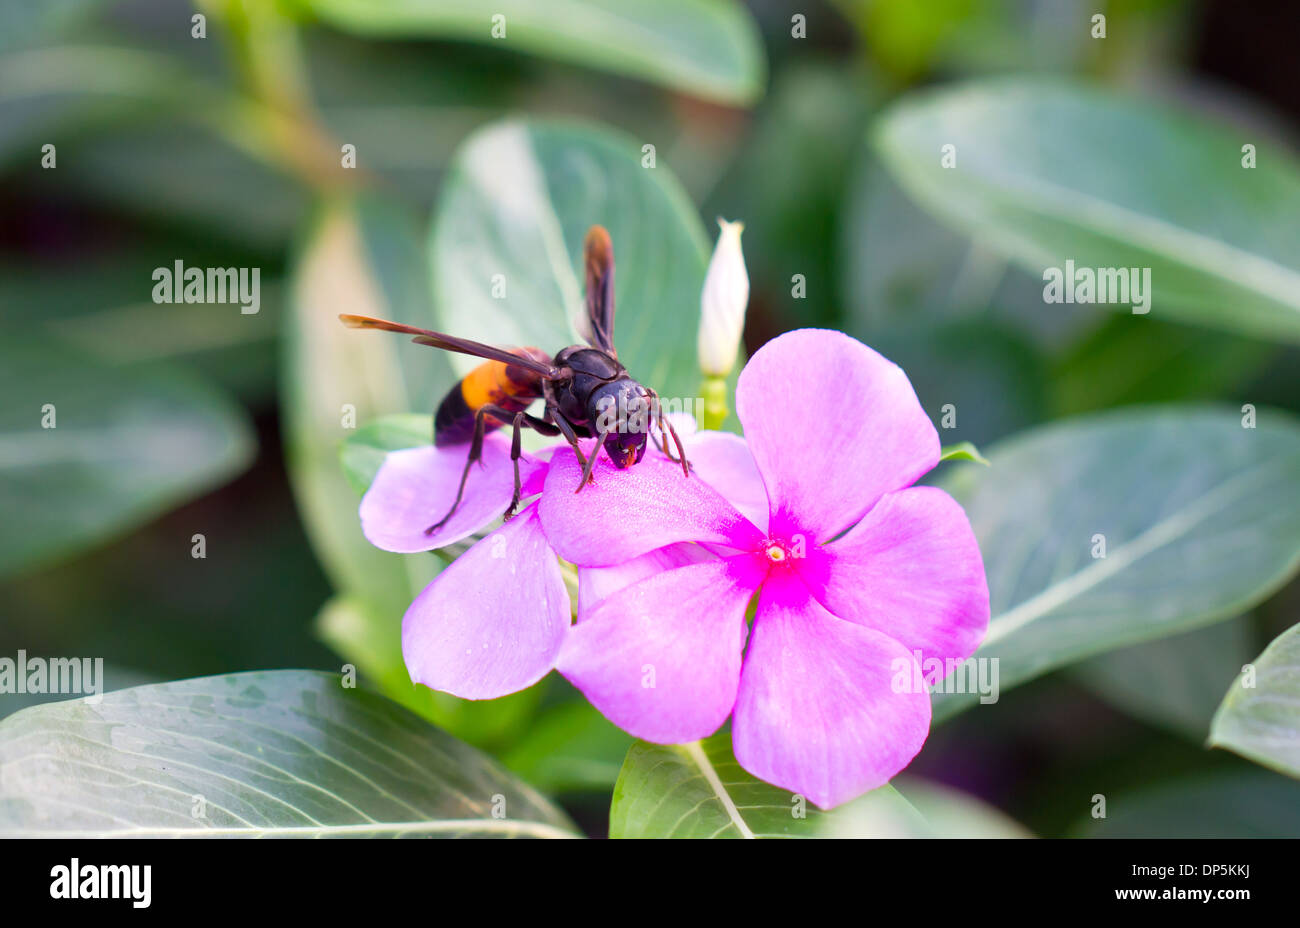 Wasp with Vinca flowers or Periwinkle flowers. Stock Photo